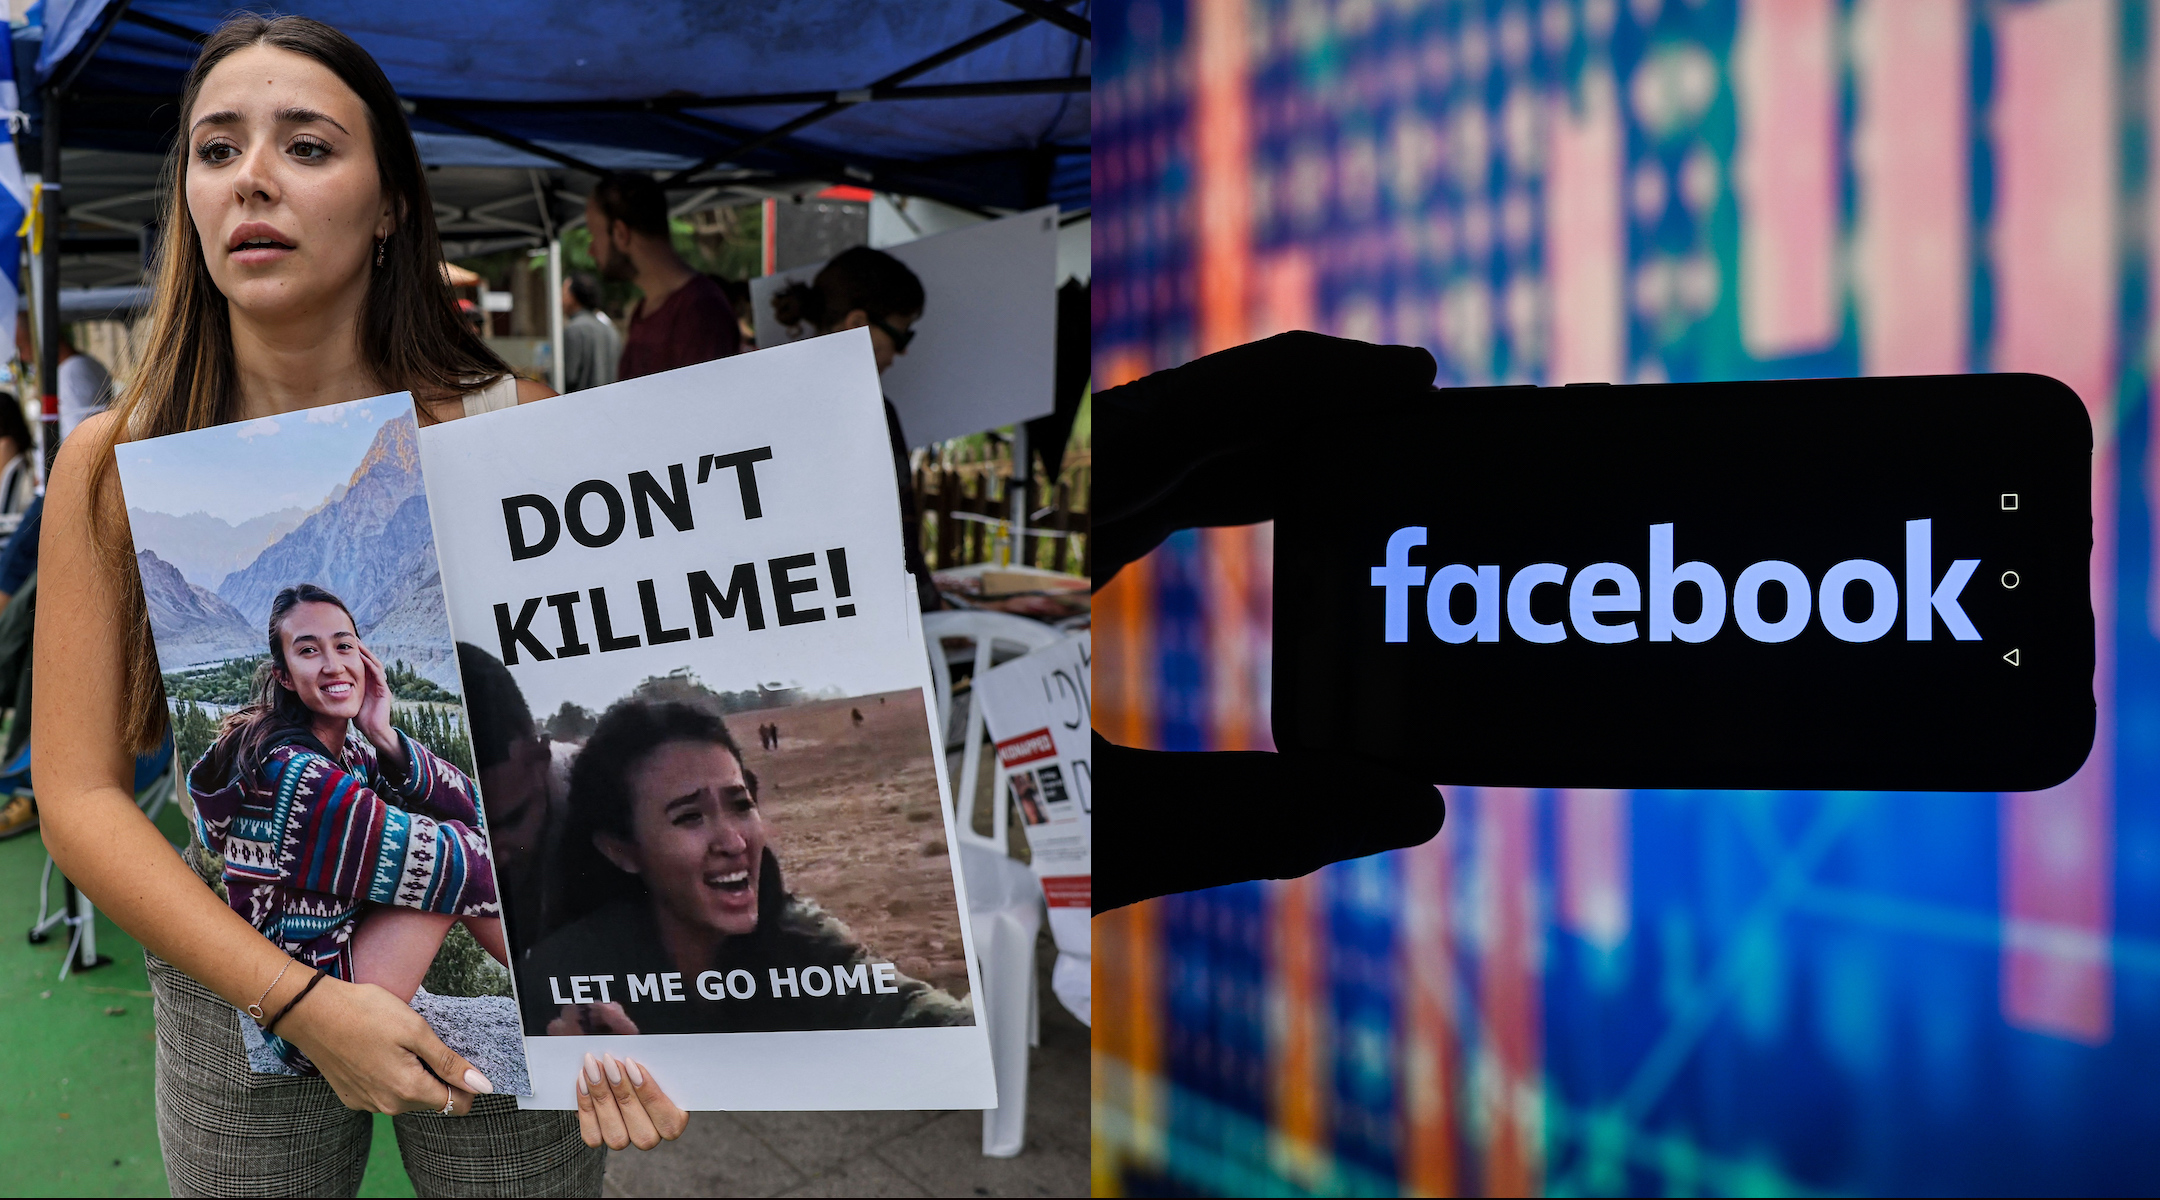 A photo of an Israeli hostage of the Oct. 7 attacks and an image of a phone with the word "Facebook" displayed across it